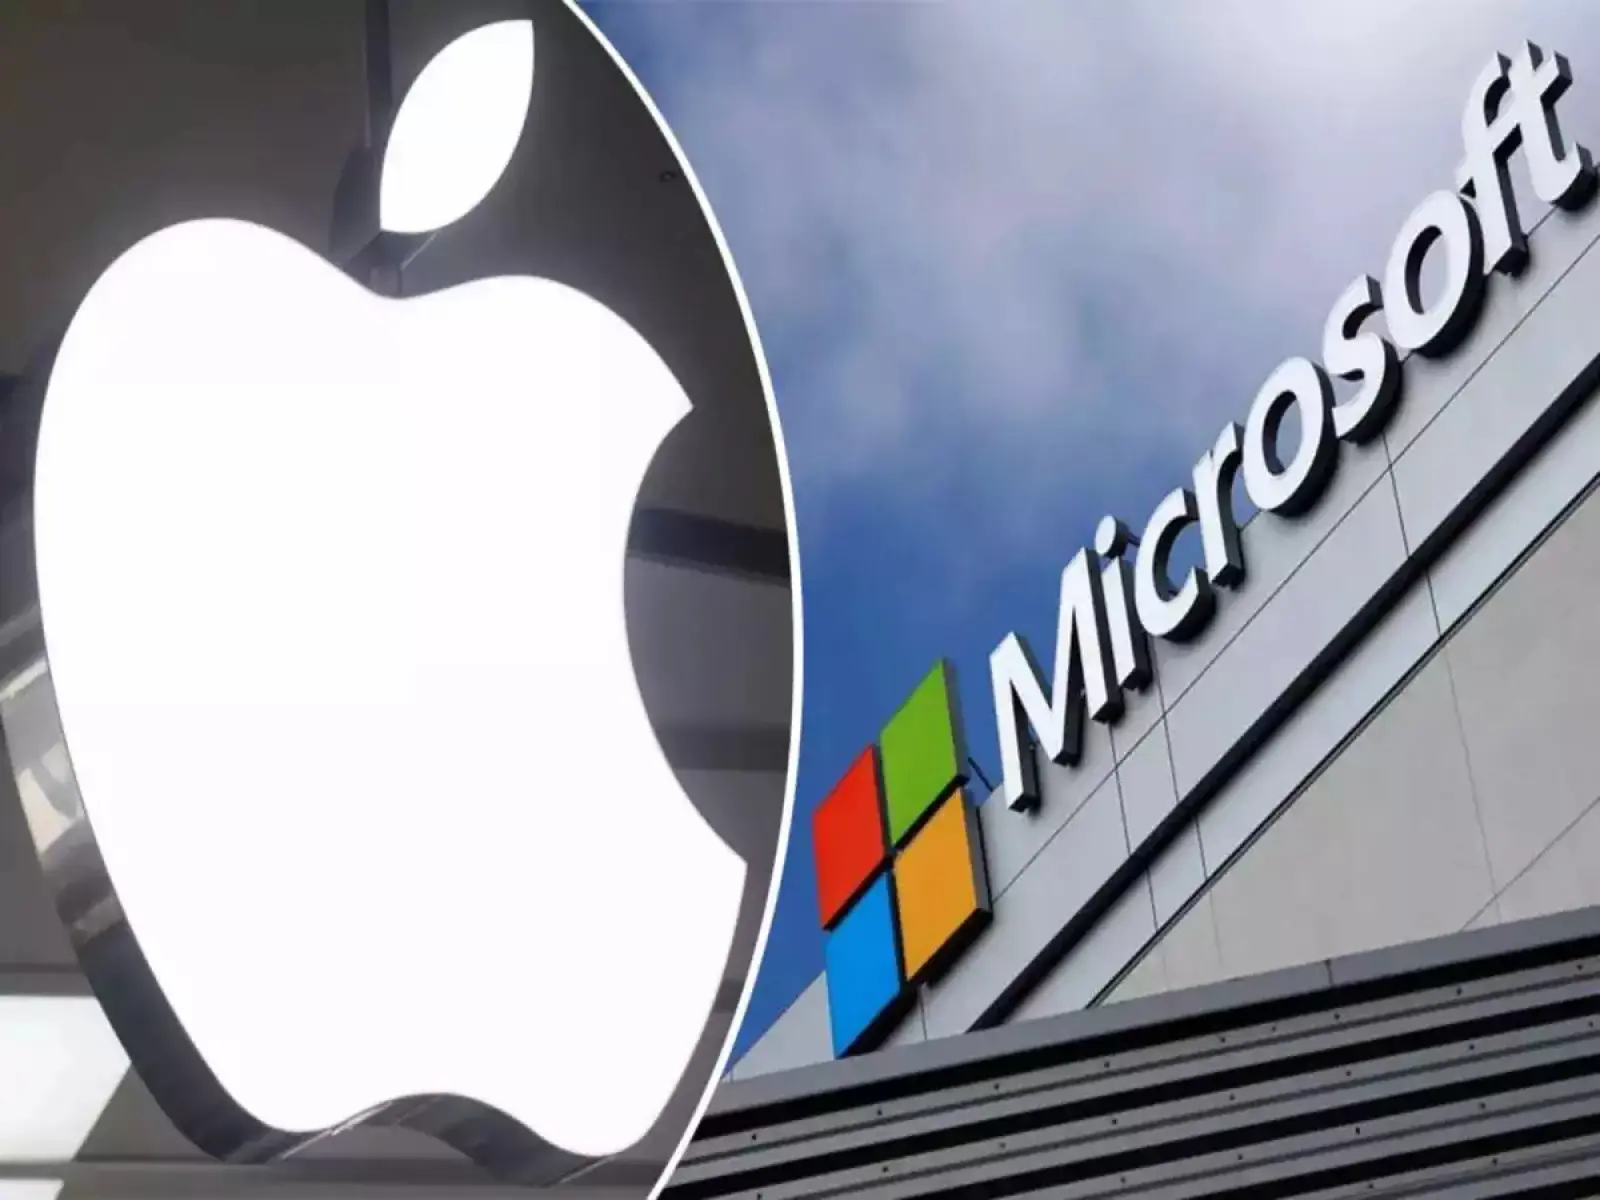 Apple is surpassed by Microsoft to become the most valuable firm in the world, know more